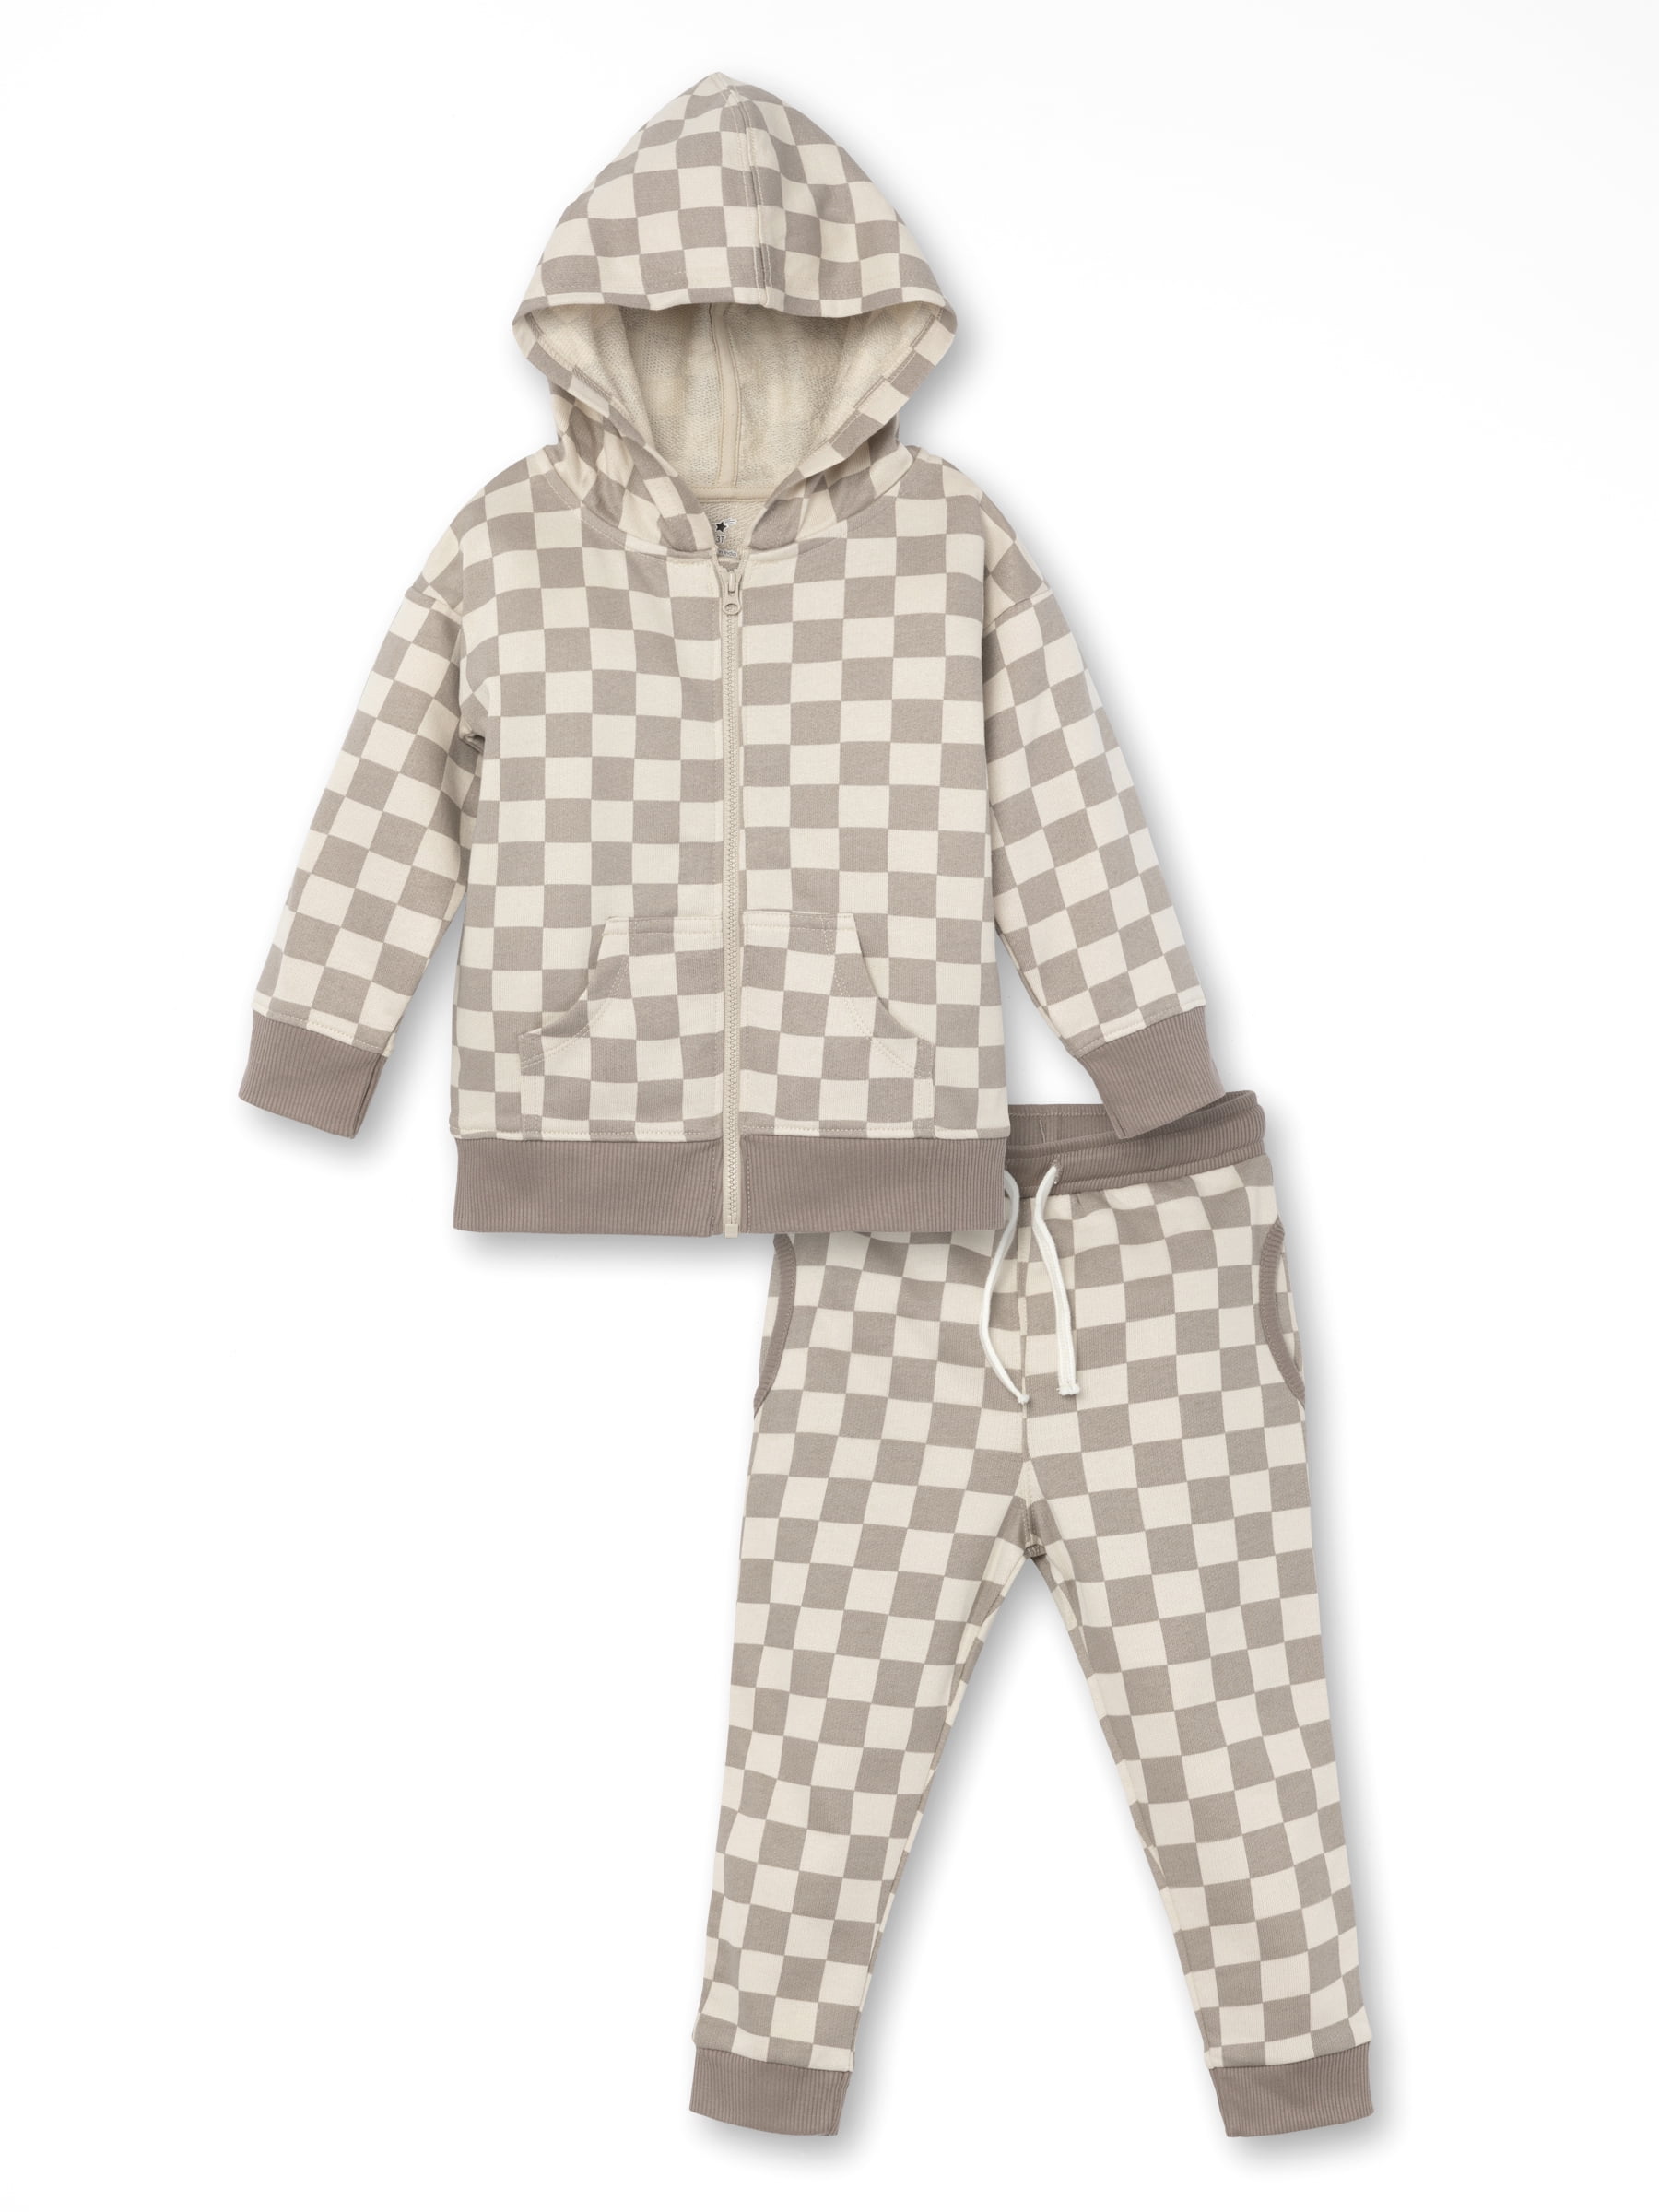 Little Star Organic Toddler Unisex 2 Pc Long Sleeve Hoodie and Jogger Pants  Set, Size 12M-5T 